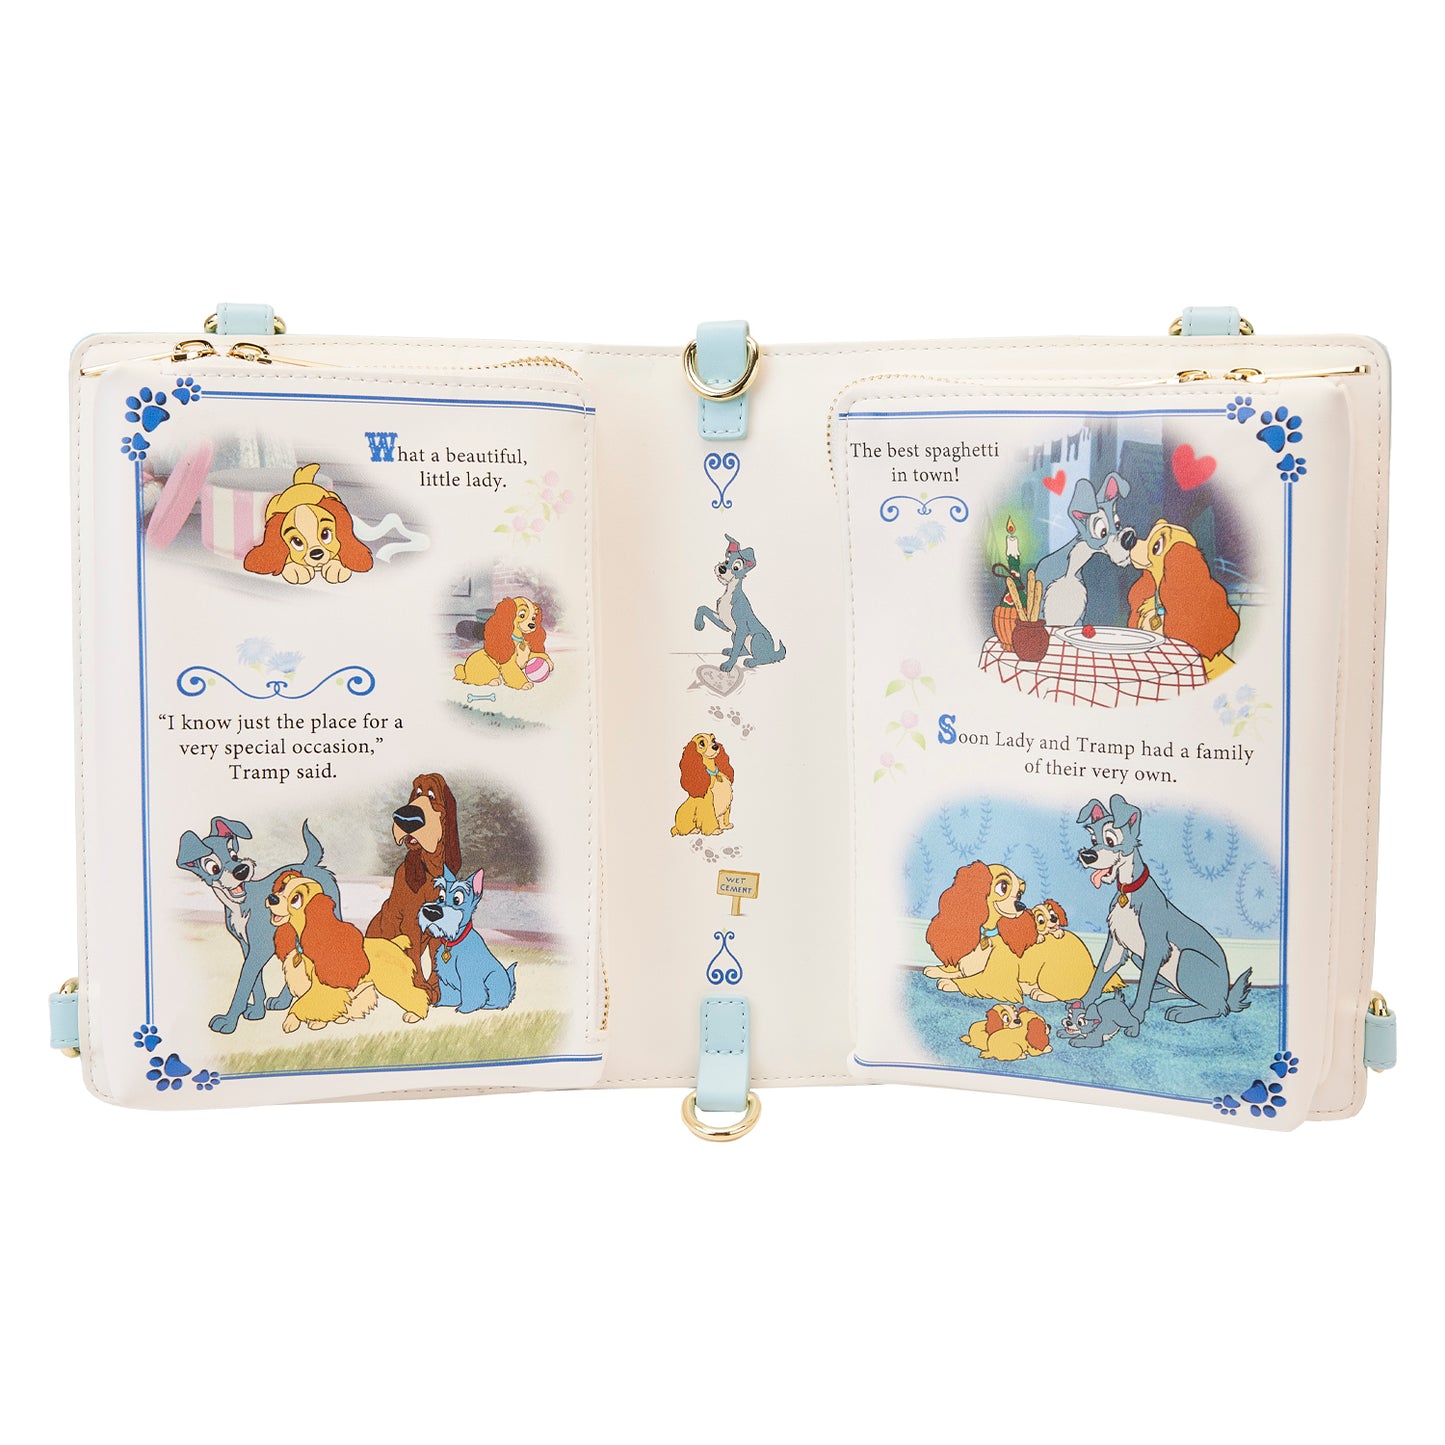 Loungefly Disney Lady And The Tramp Classic Book Convertible Crossbody Purse